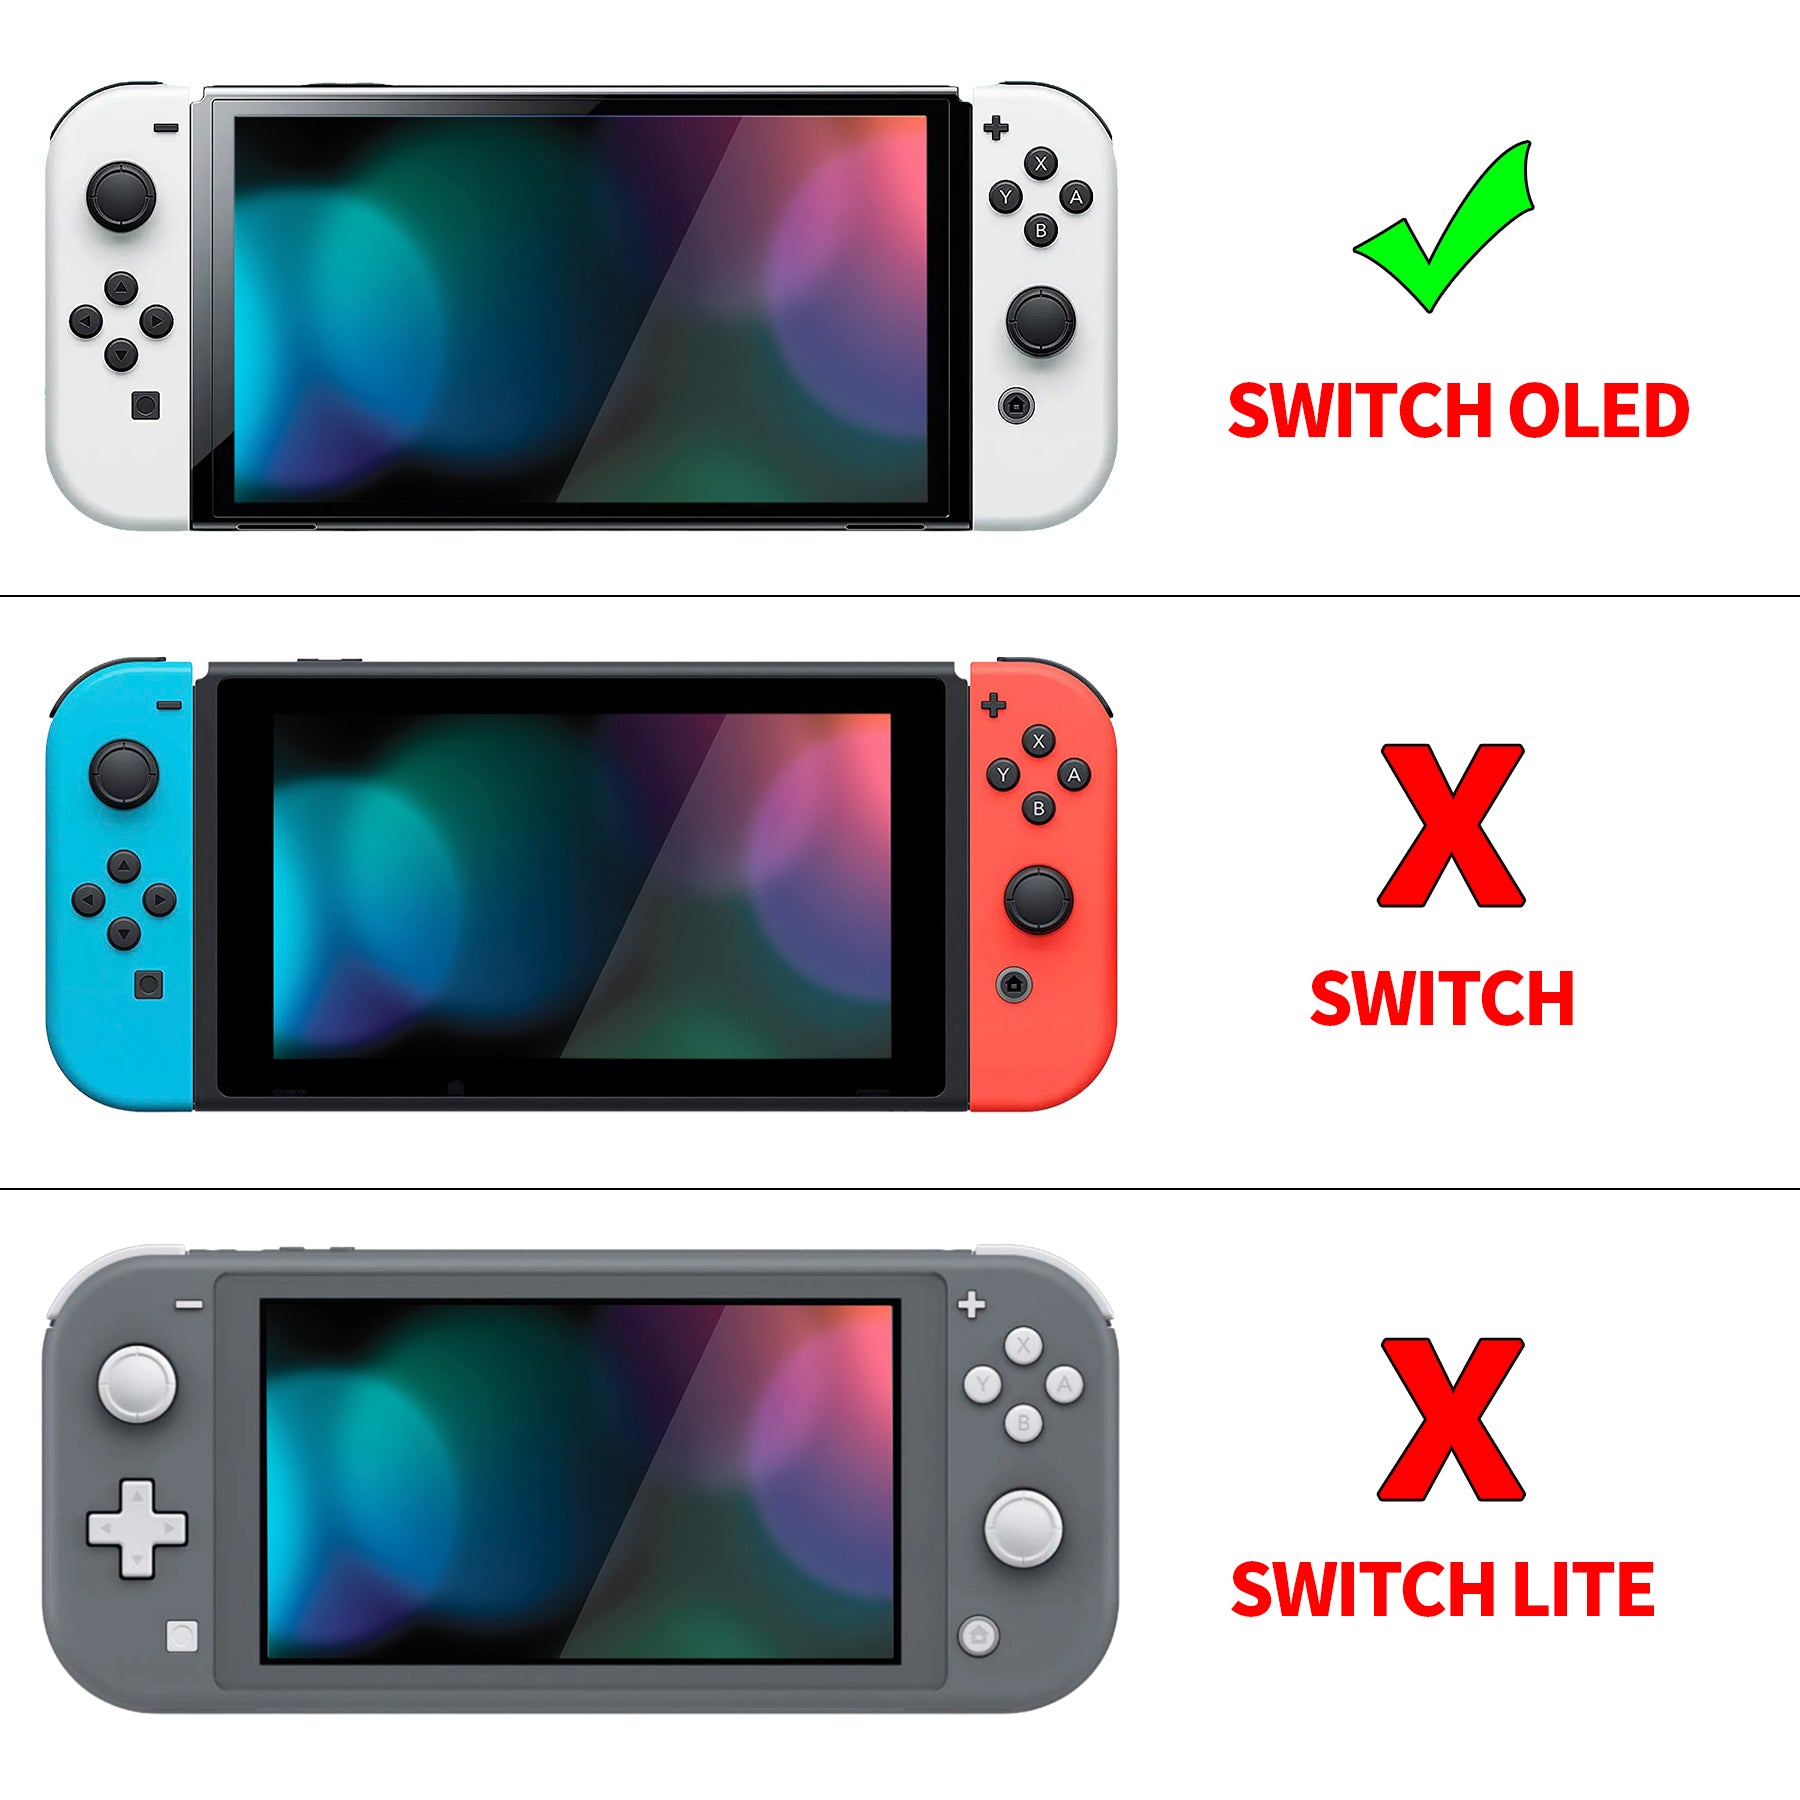 PlayVital ZealProtect Soft Protective Case for Switch OLED, Flexible Protector Joycon Grip Cover for Switch OLED with Thumb Grip Caps & ABXY Direction Button Caps - Cozy Gamer Bear Case - XSOYV6035 playvital